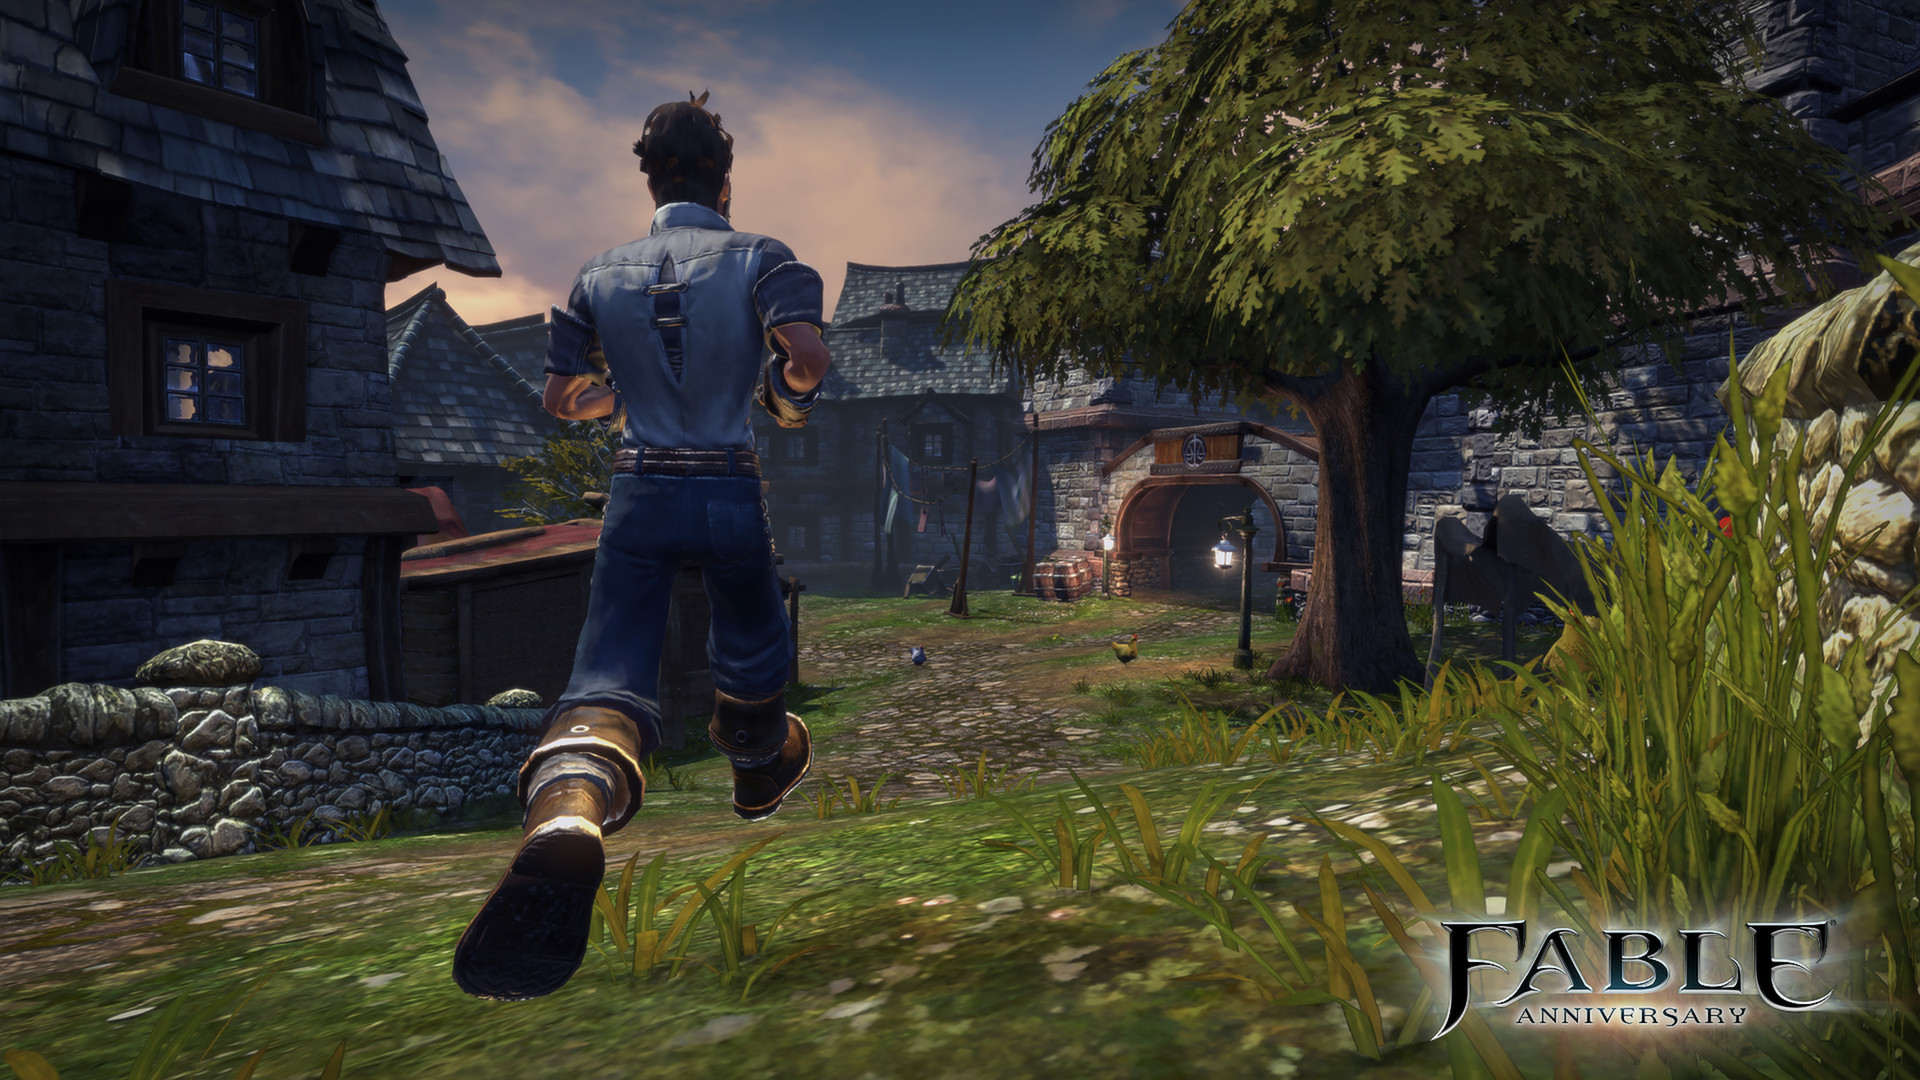 Fable 3 on steam фото 19